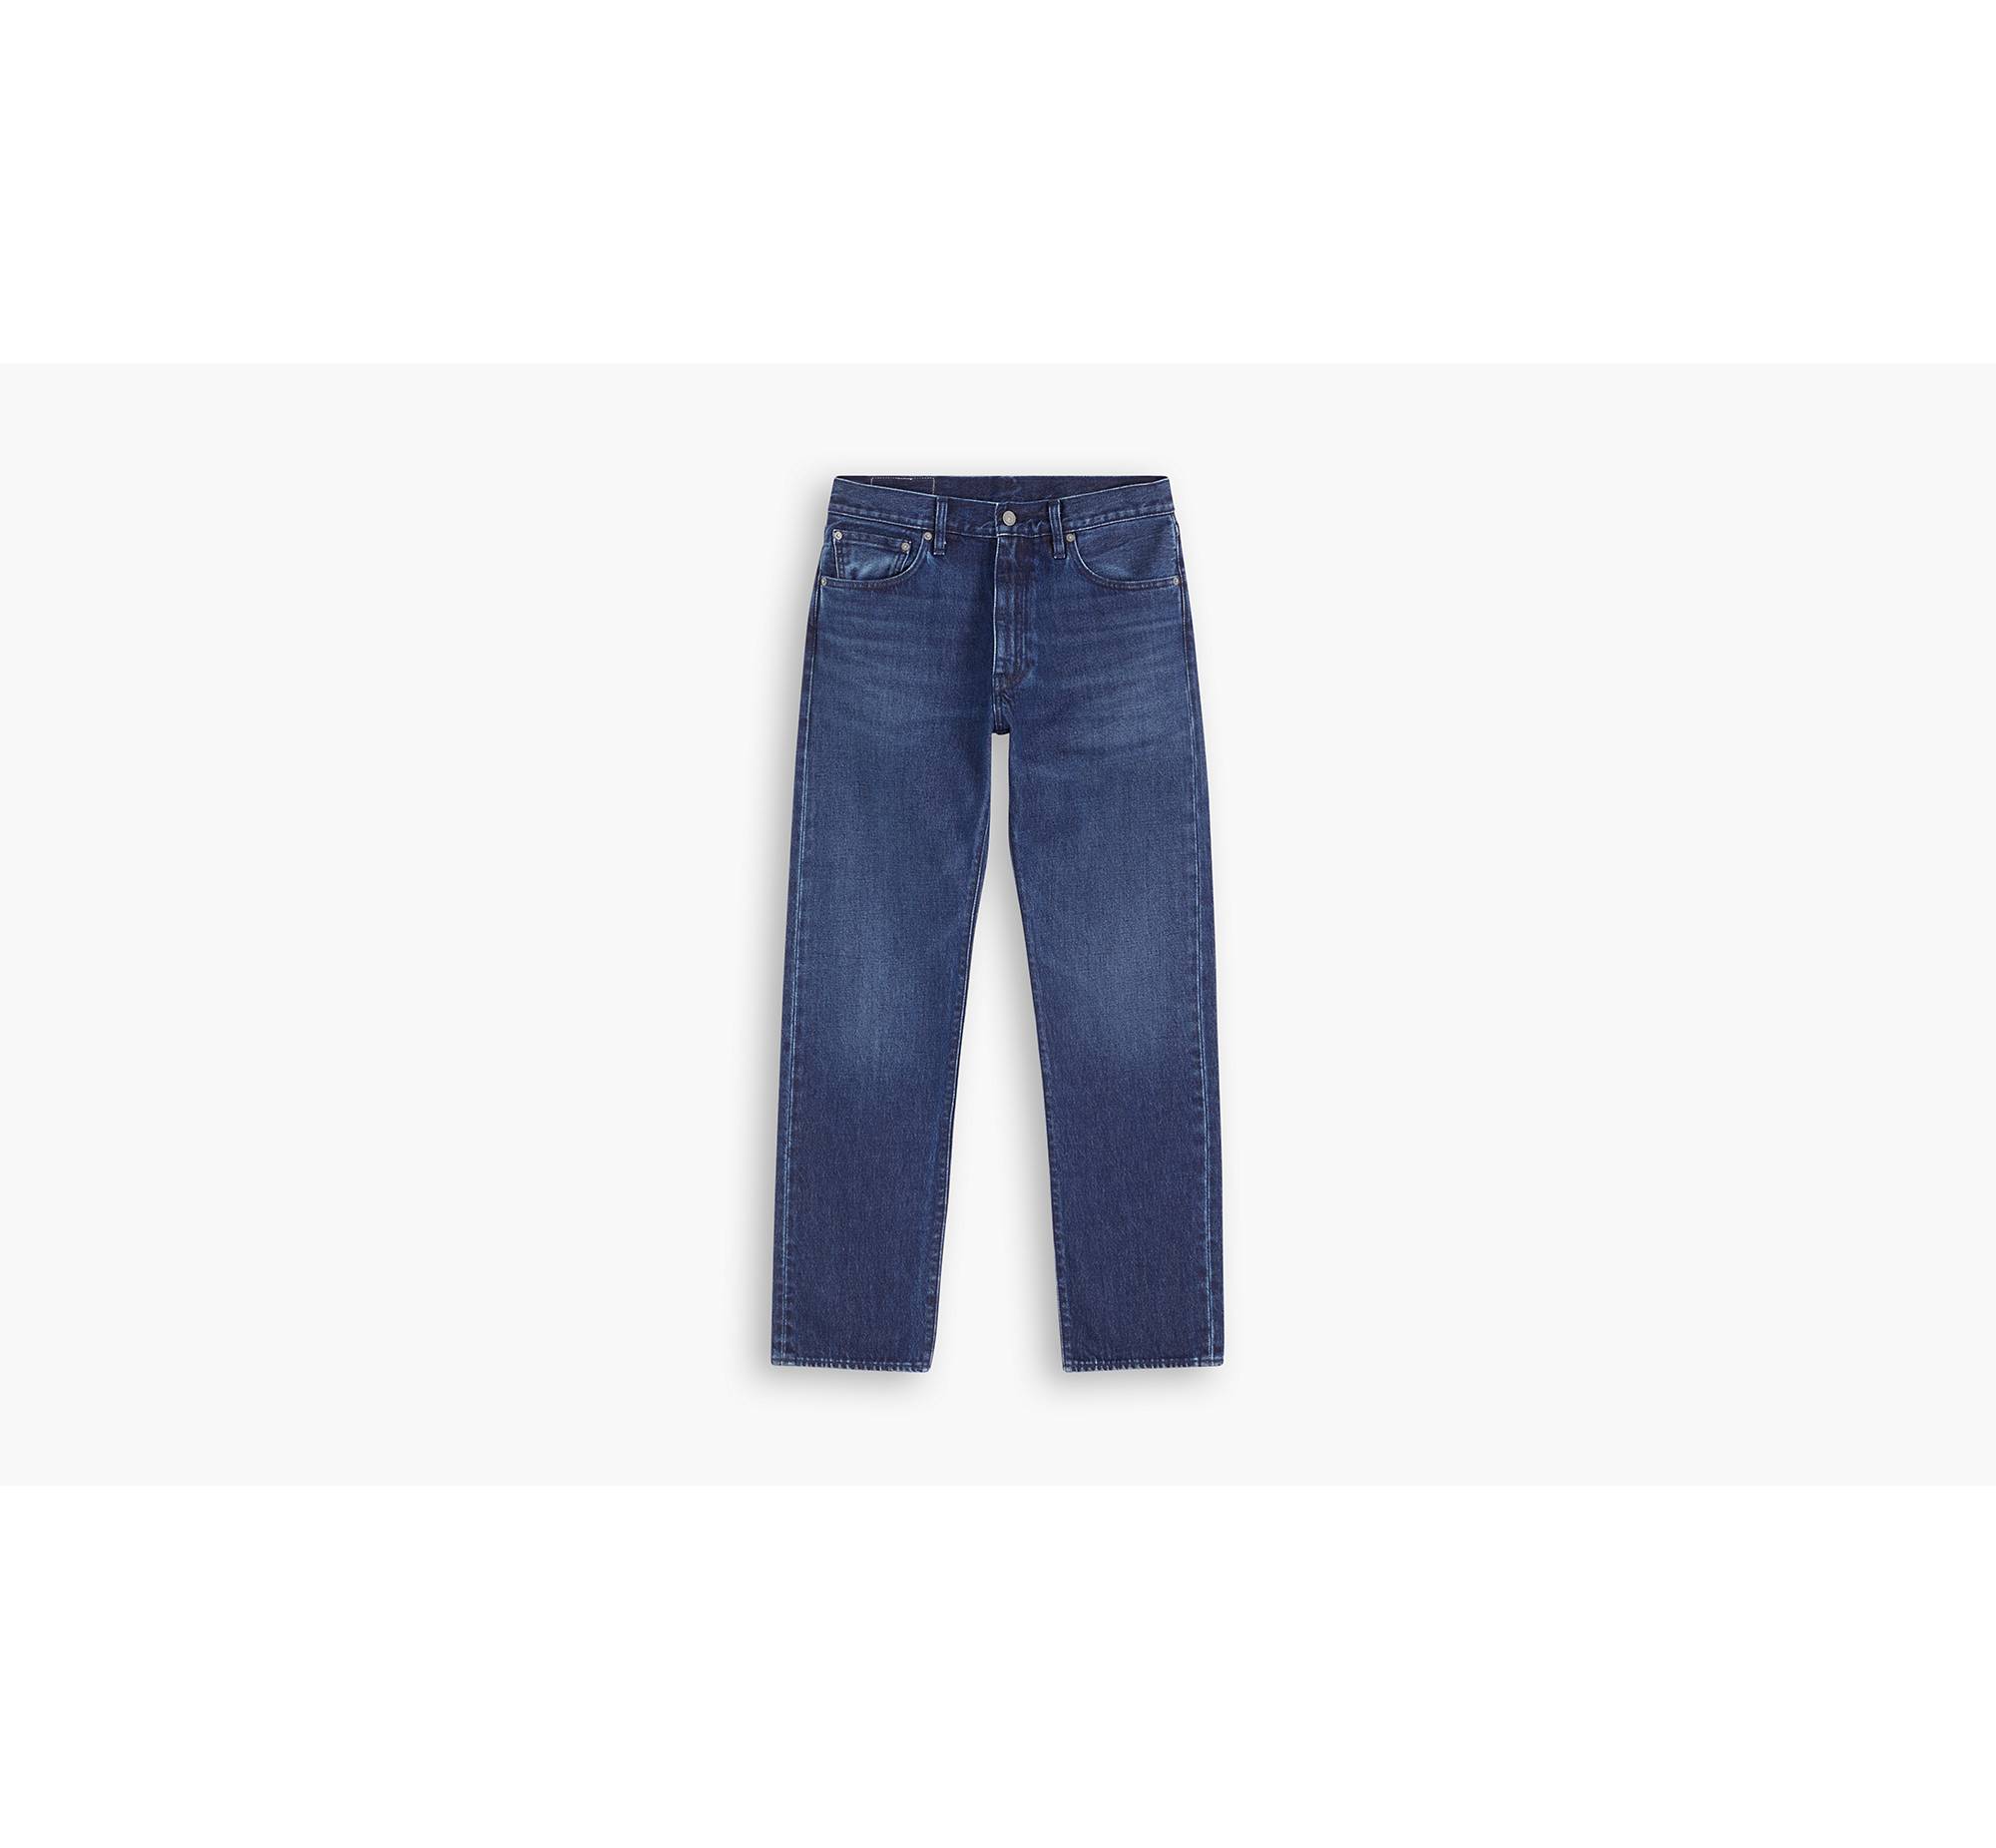 Wellthread® 551™ Z Authentic Straight Jeans - Blue | Levi's® AD